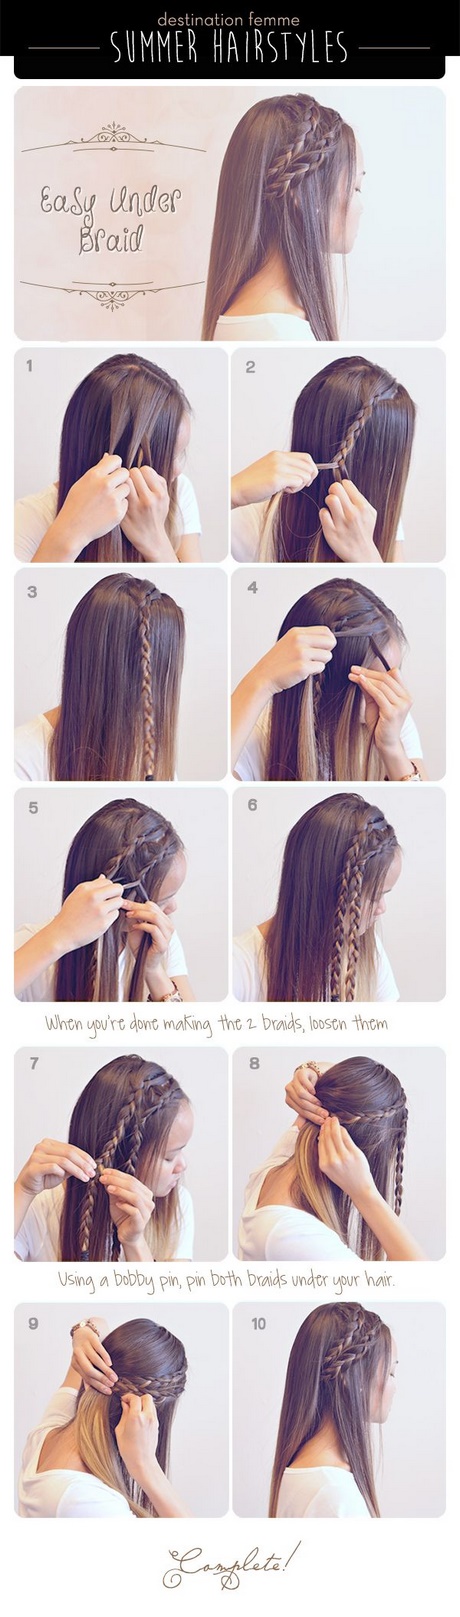 simple-easy-hairstyles-for-long-straight-hair-83_9 Simple easy hairstyles for long straight hair